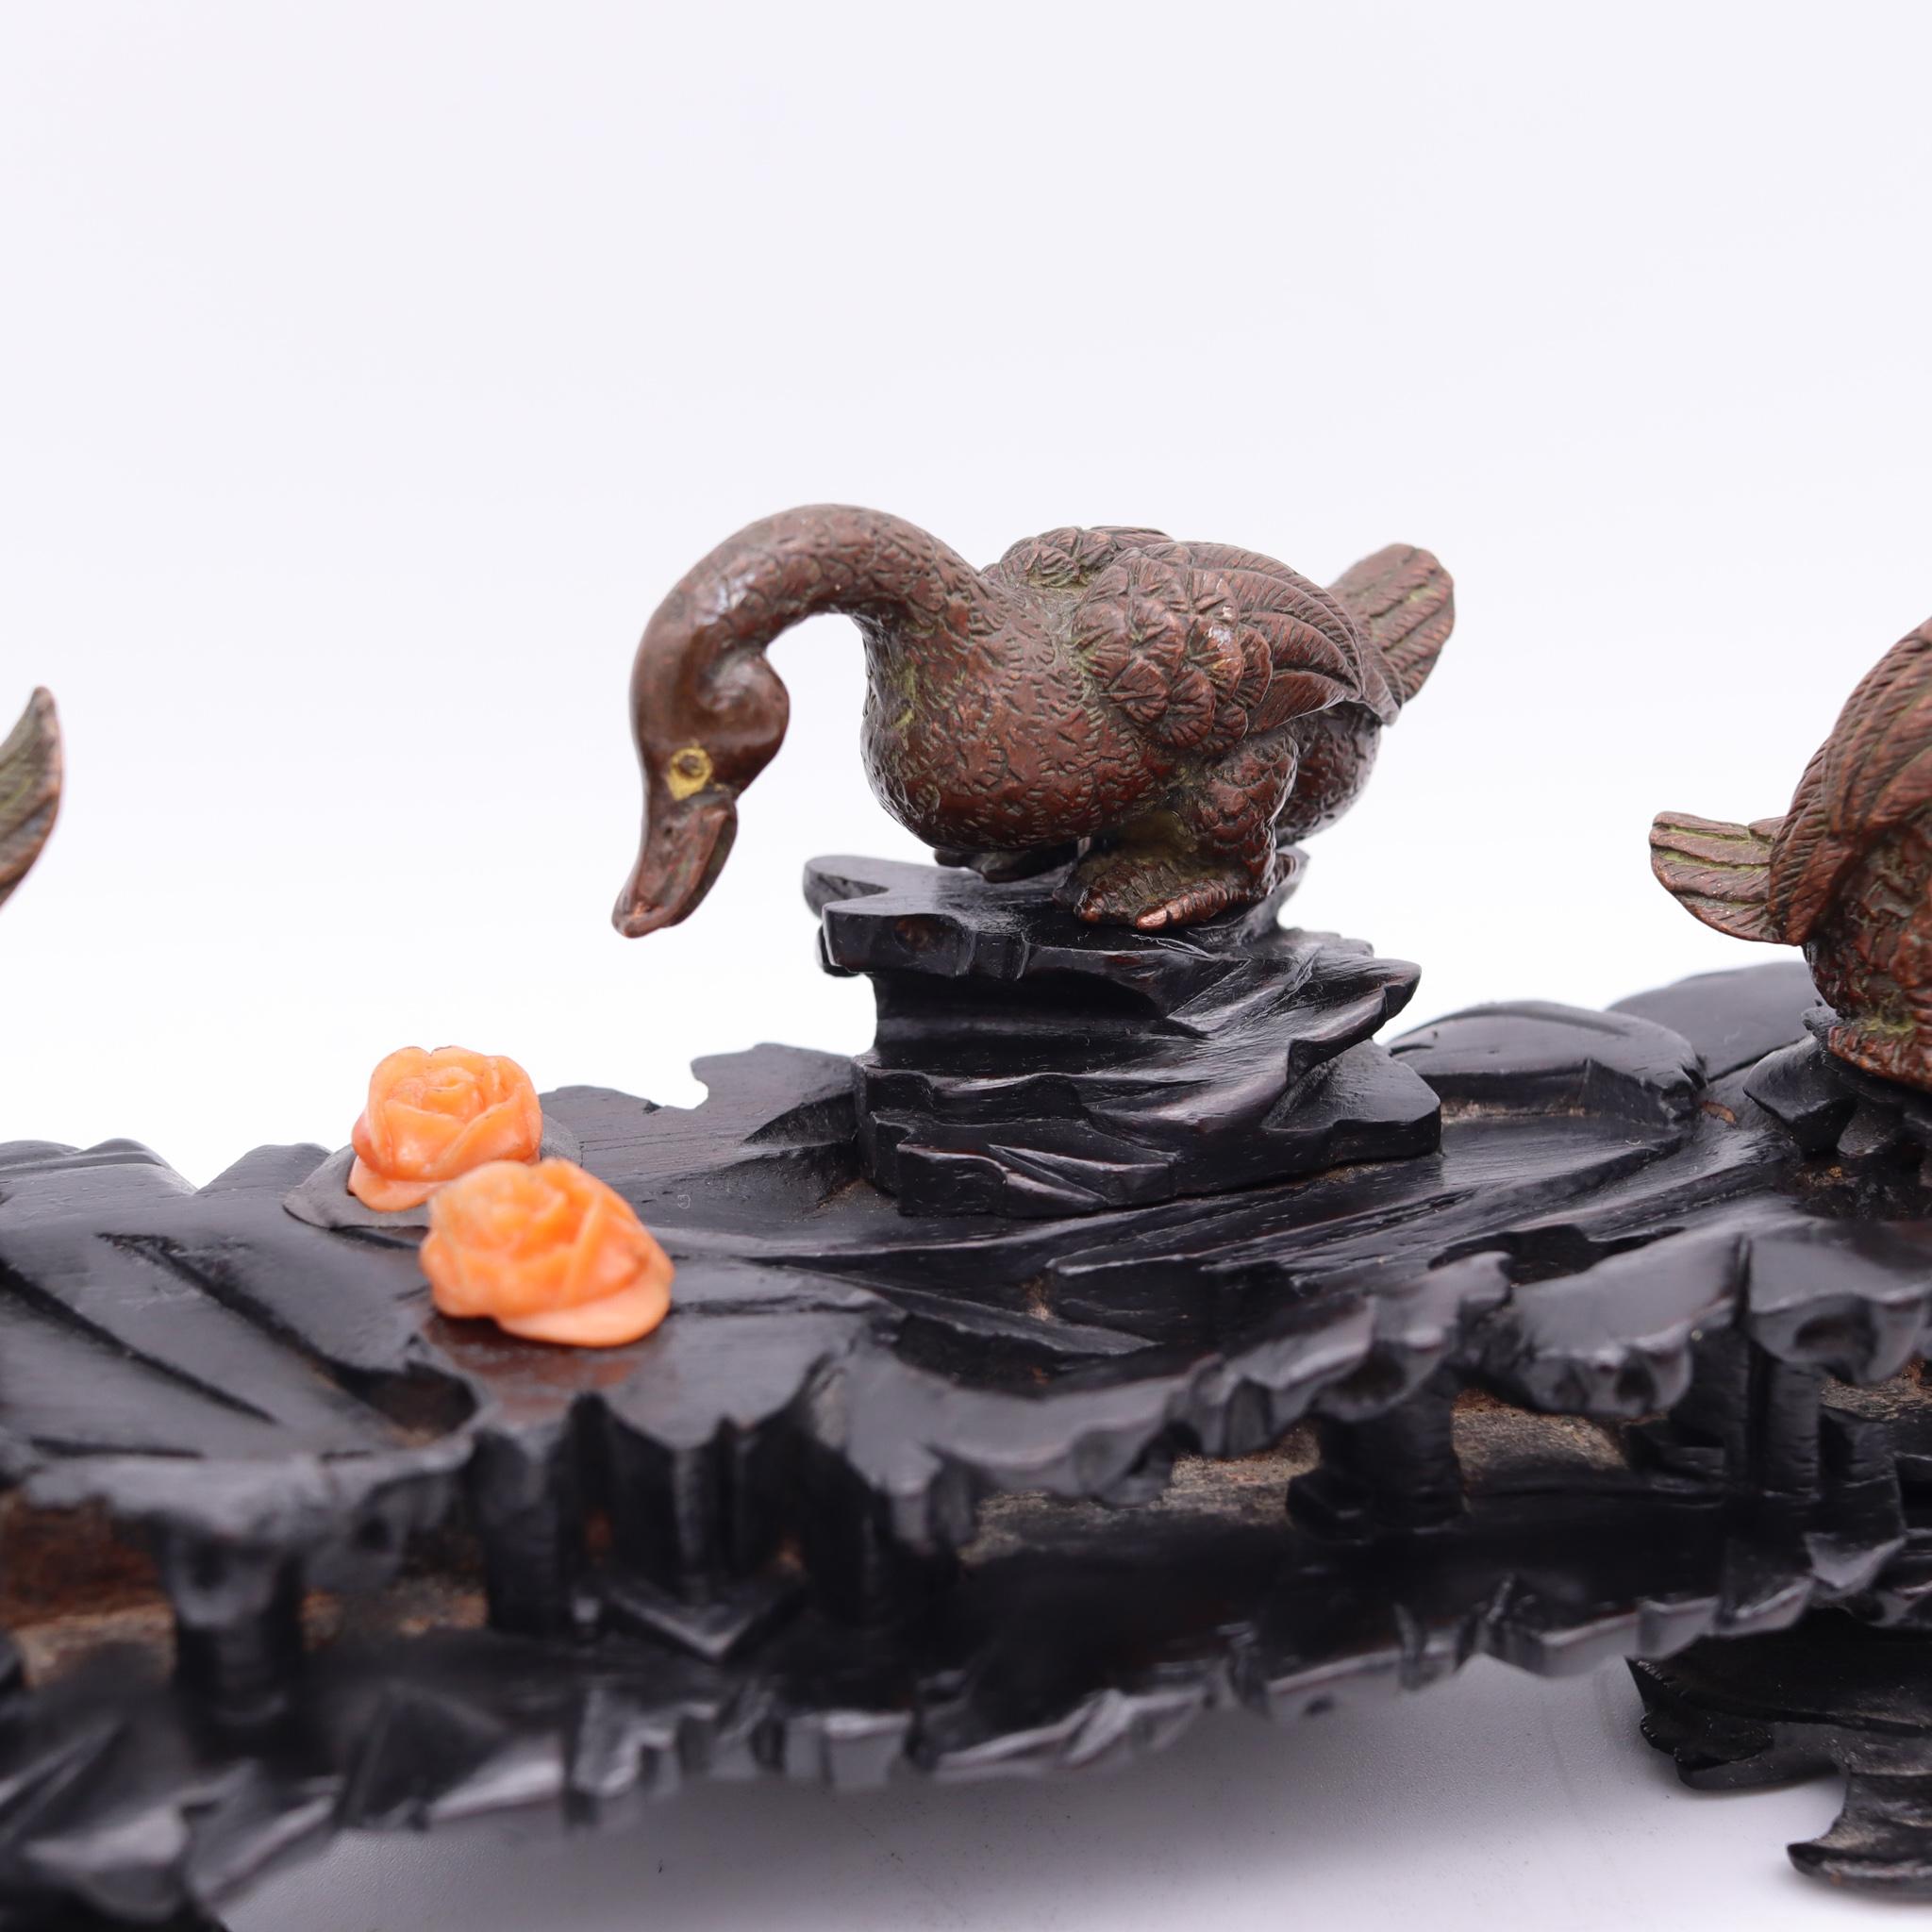 Hand-Crafted Japan Meiji 1900 Three Bronze Ducks Sculpture in Wood Stand and Coral For Sale